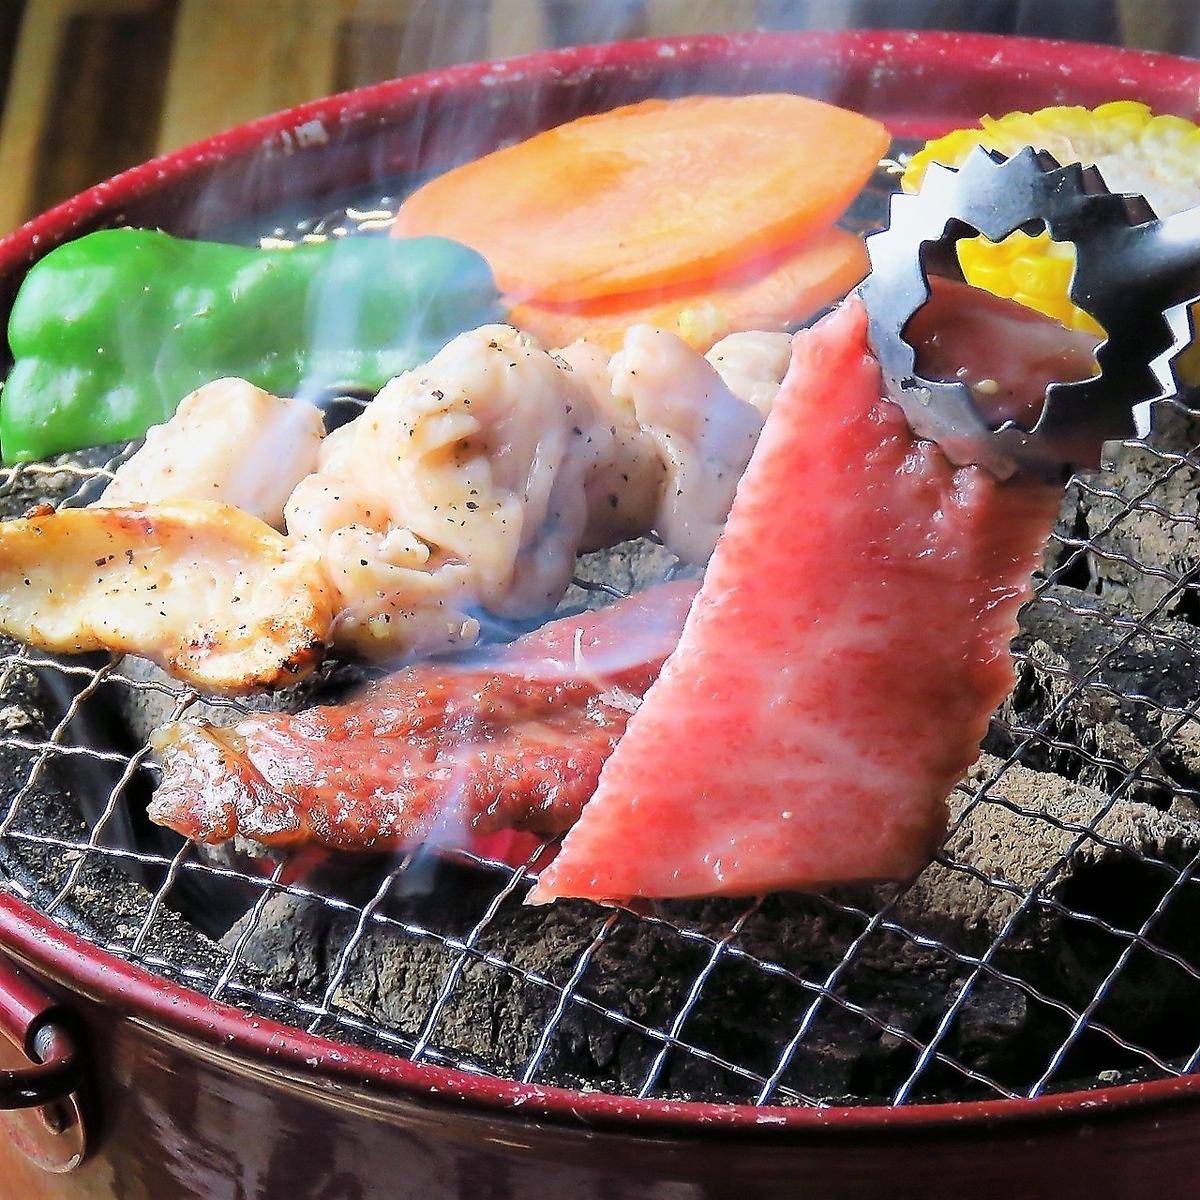 [Approximately 5 minutes walk from Minami Sakurai Station] A community-based Yakiniku restaurant where you can enjoy delicious meat and vegetables